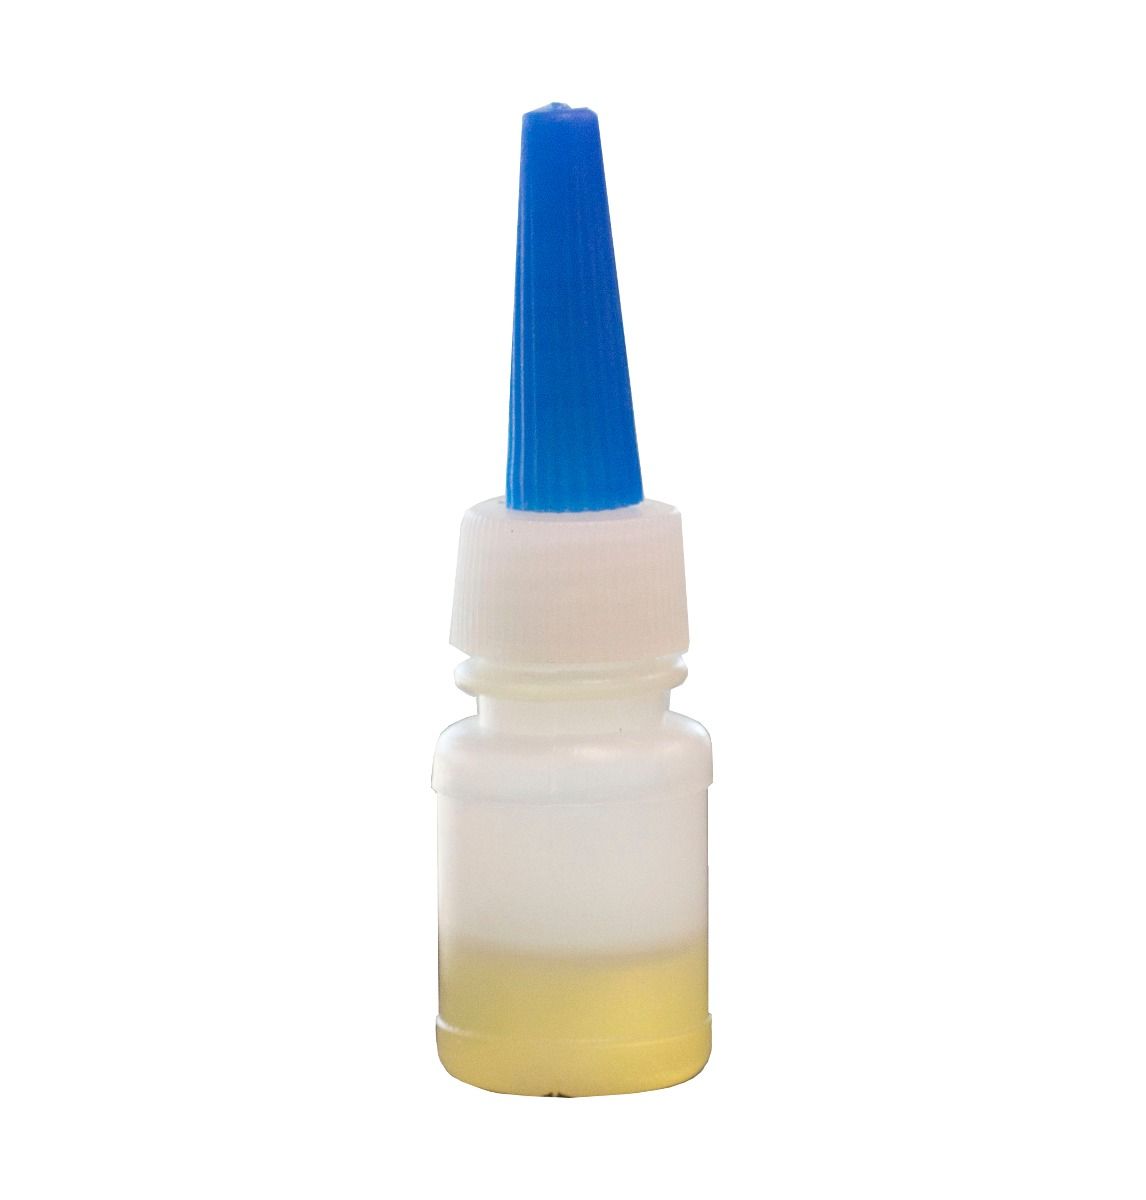 A translucent bottle of half-full immersion oil manufactured by saxon sealed with a blue lid.